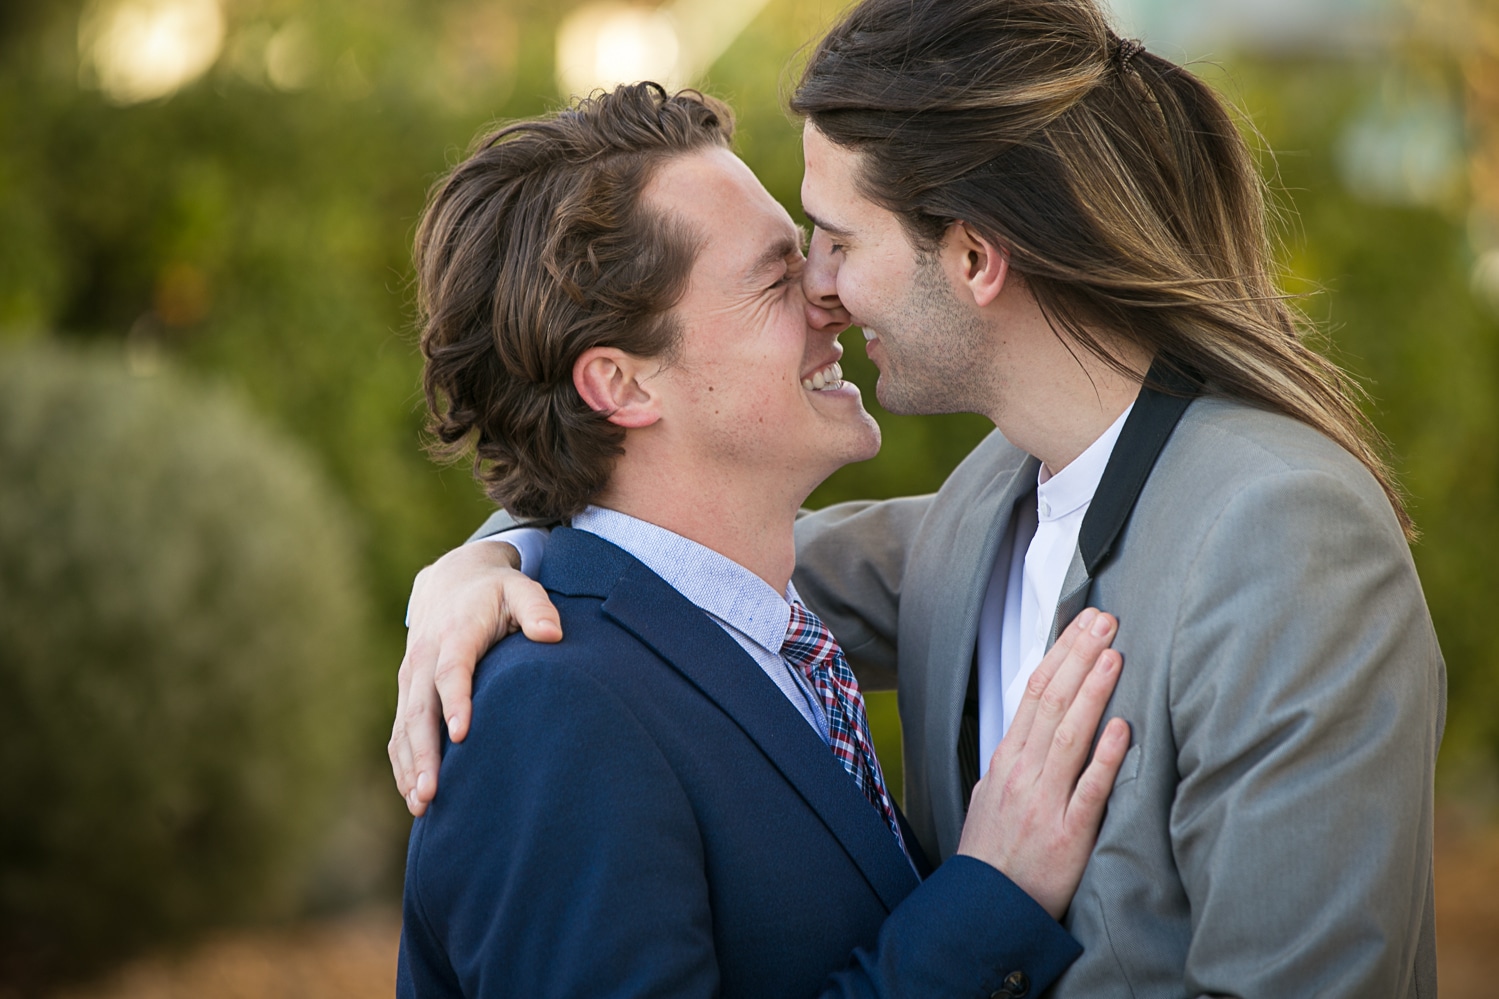 LGBTQ engagement session: Ryan and Vince